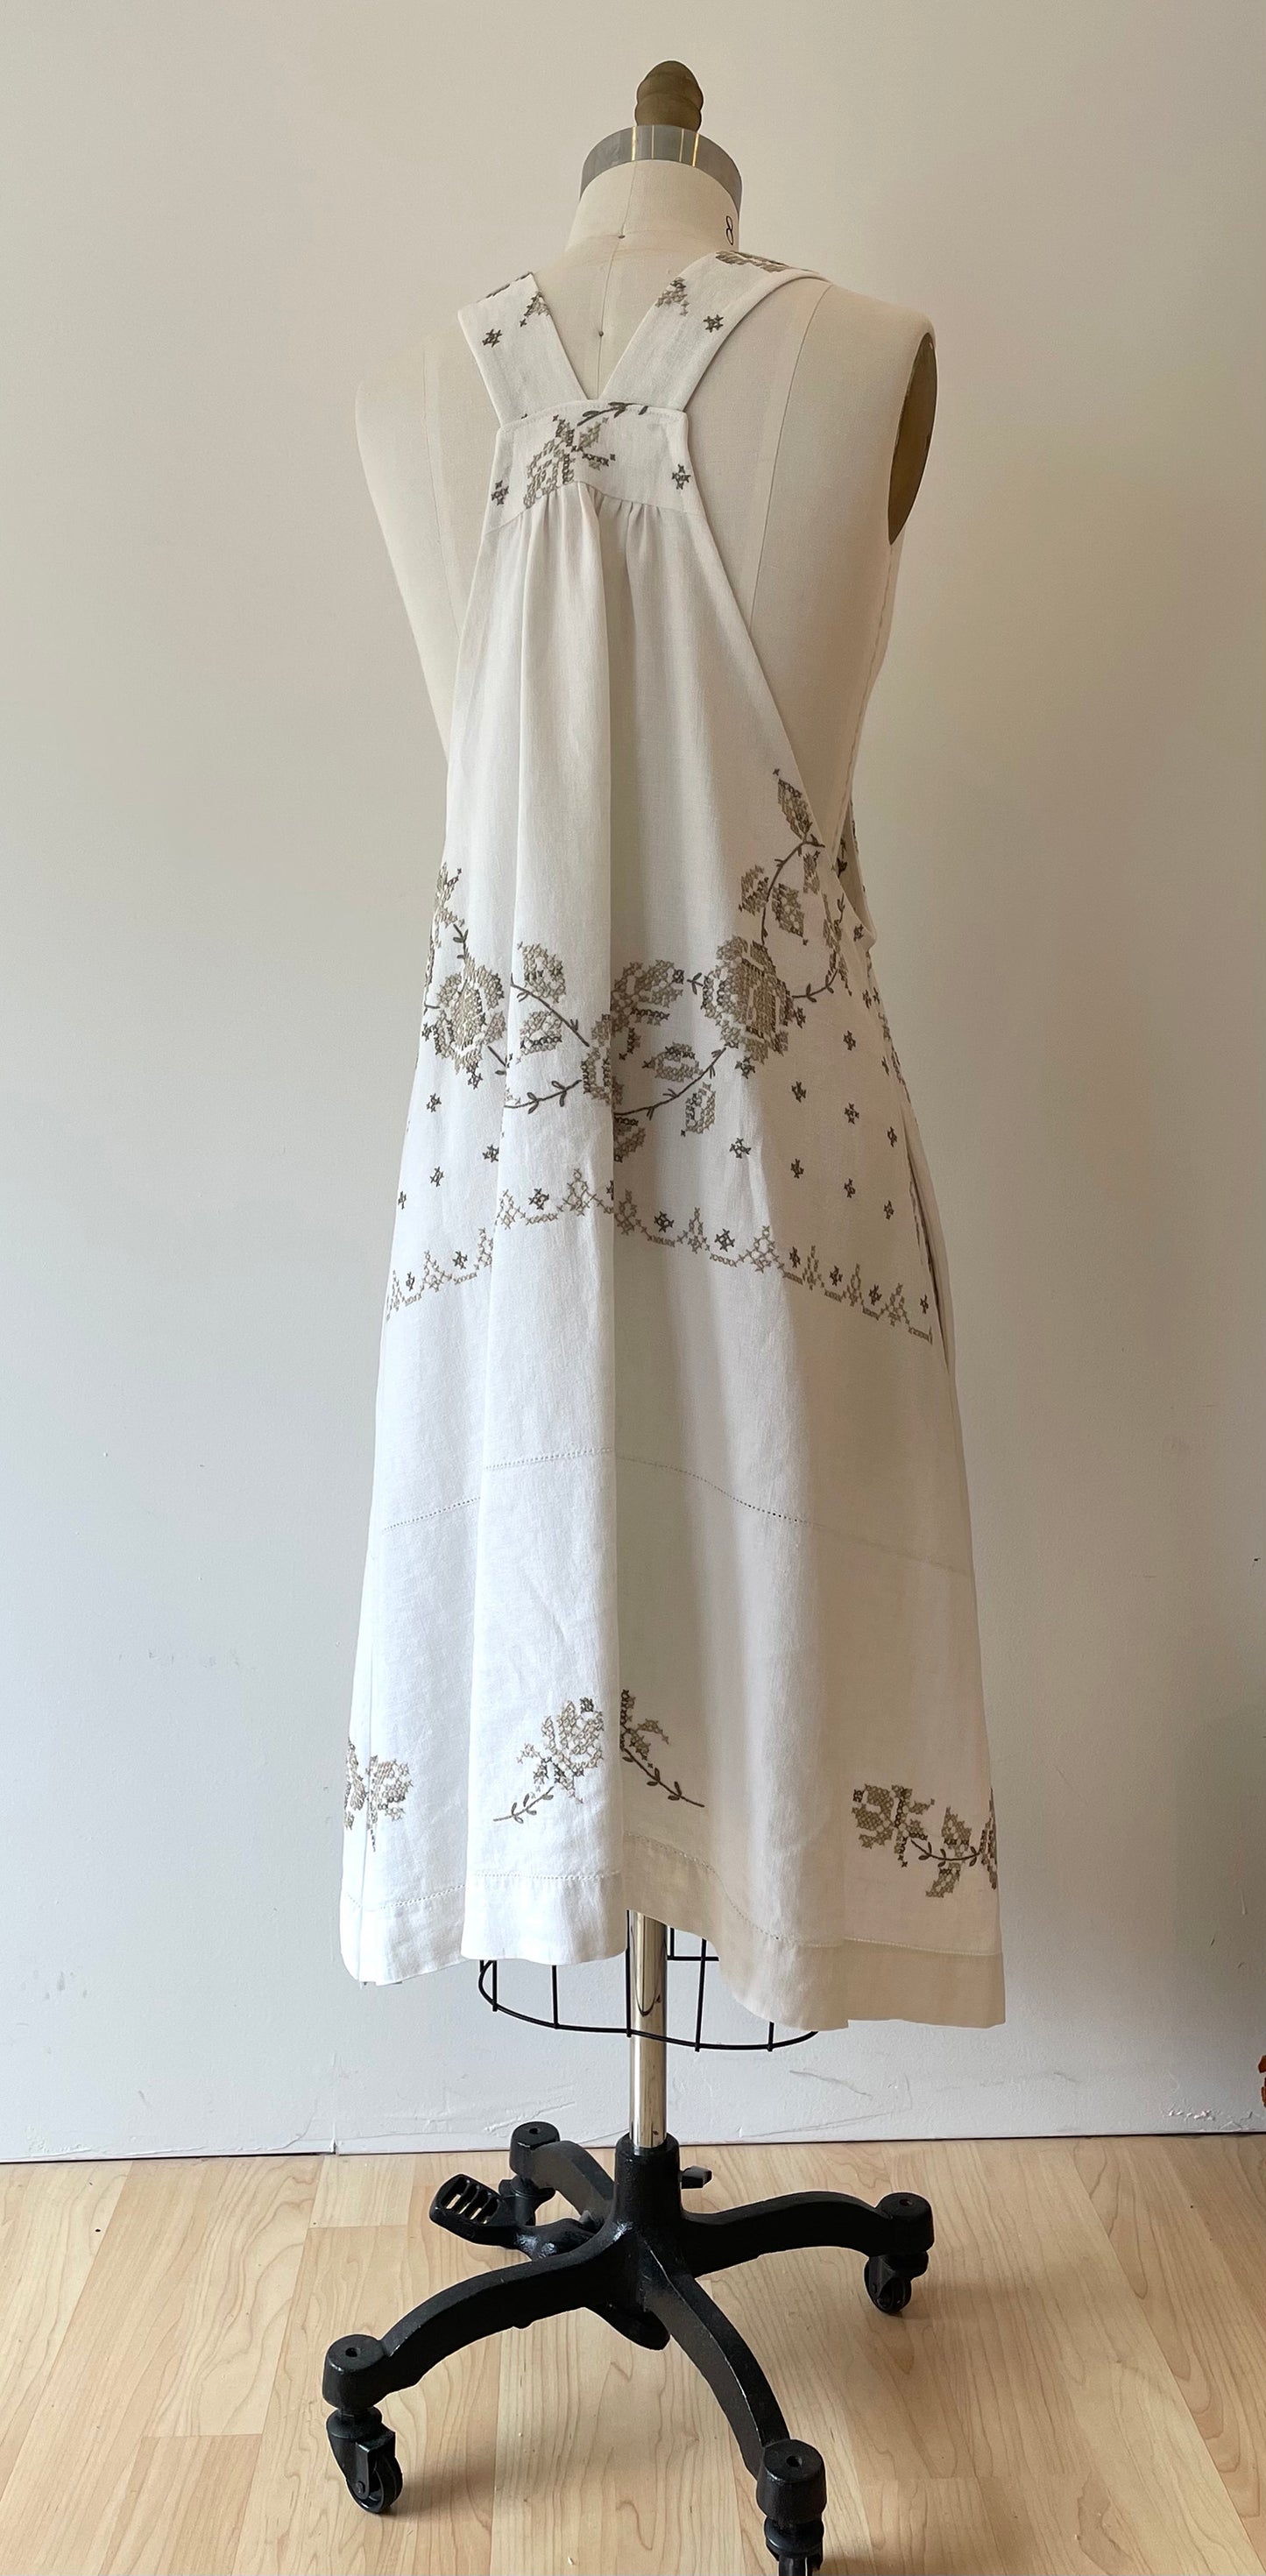 *Soft Earth Tone Floral* ~ Vintage Hand Embroidered Tablecloth Dress ~ Size 2X